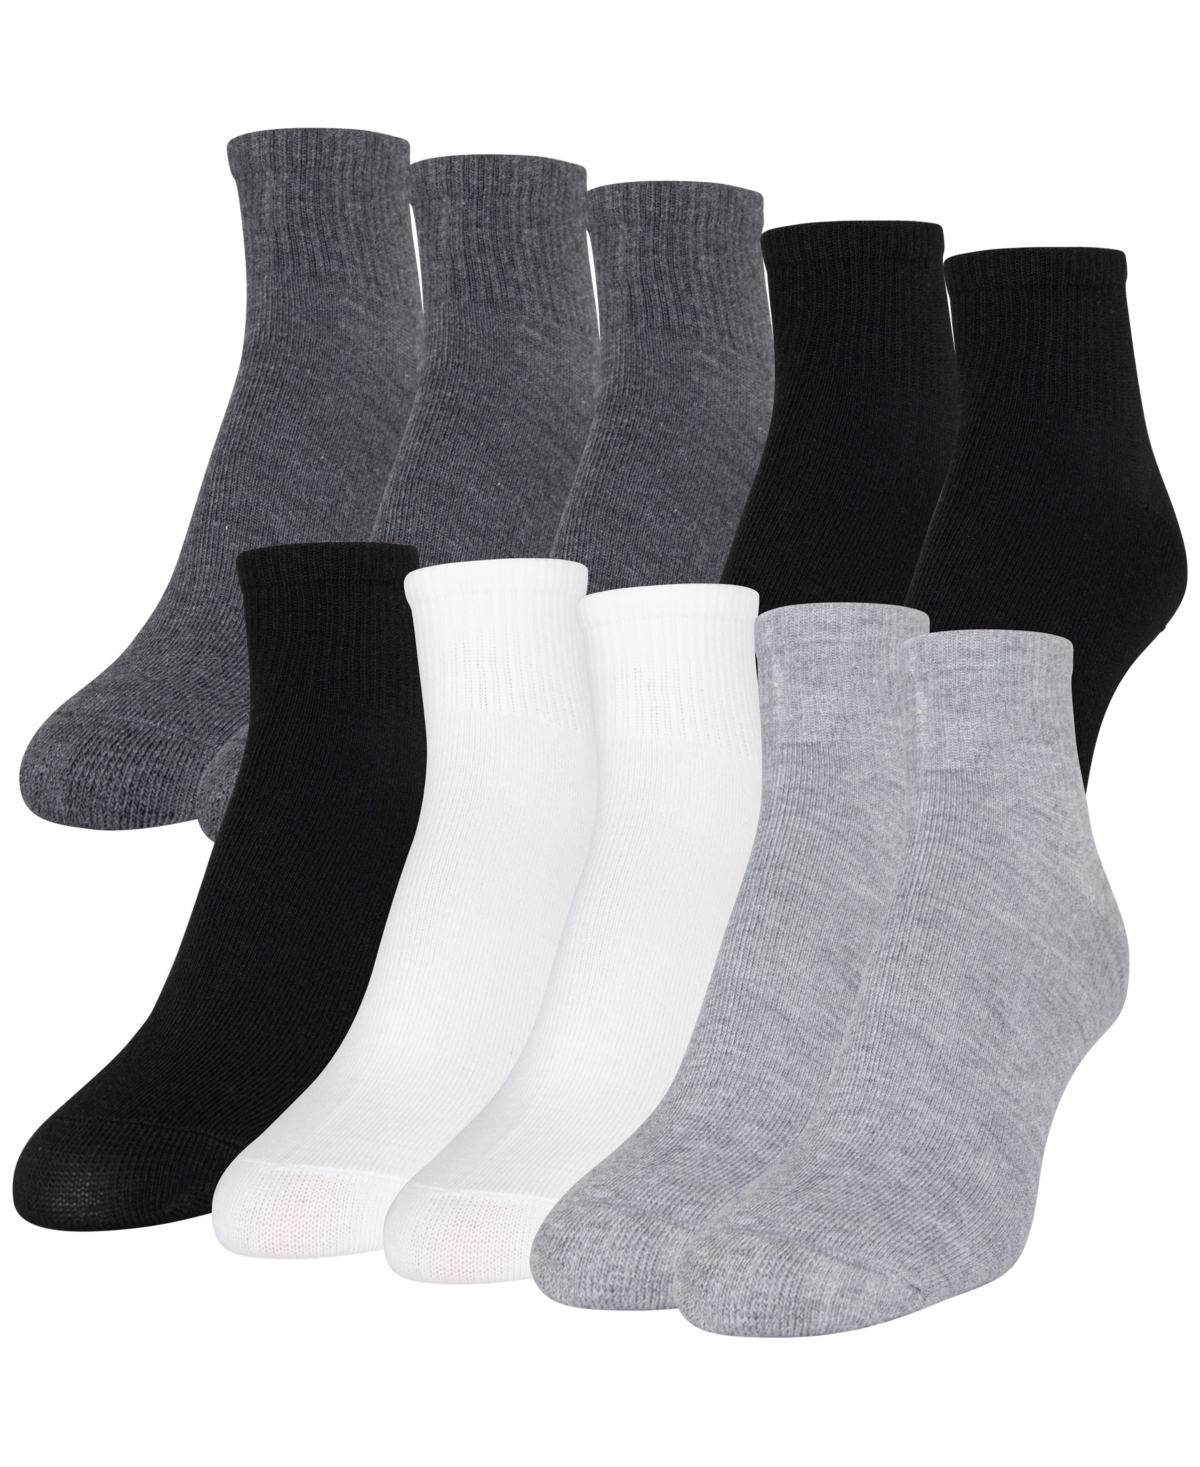 Women's 10-Pack Casual Cushion Heel And Toe Ankle Socks - Grey Heather